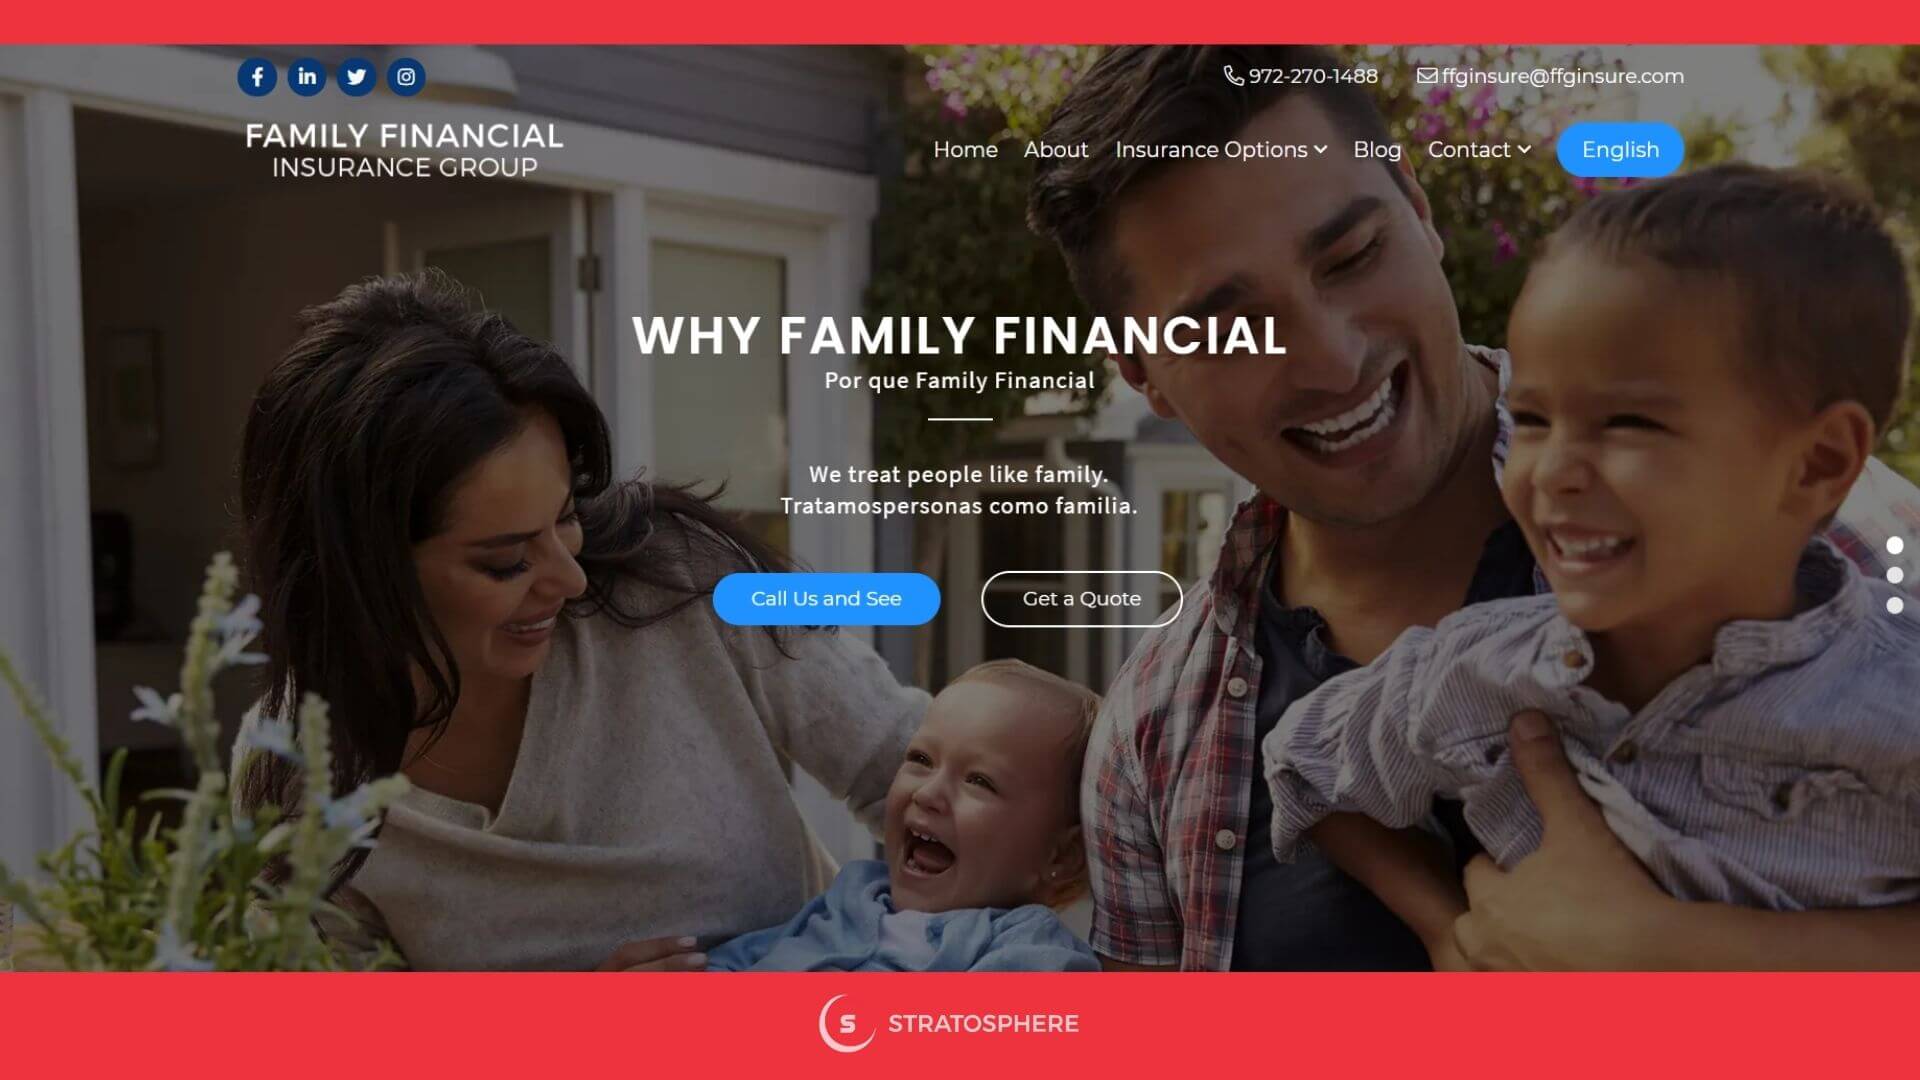 Family Financial Insurance Website using two languages to target foreigner community